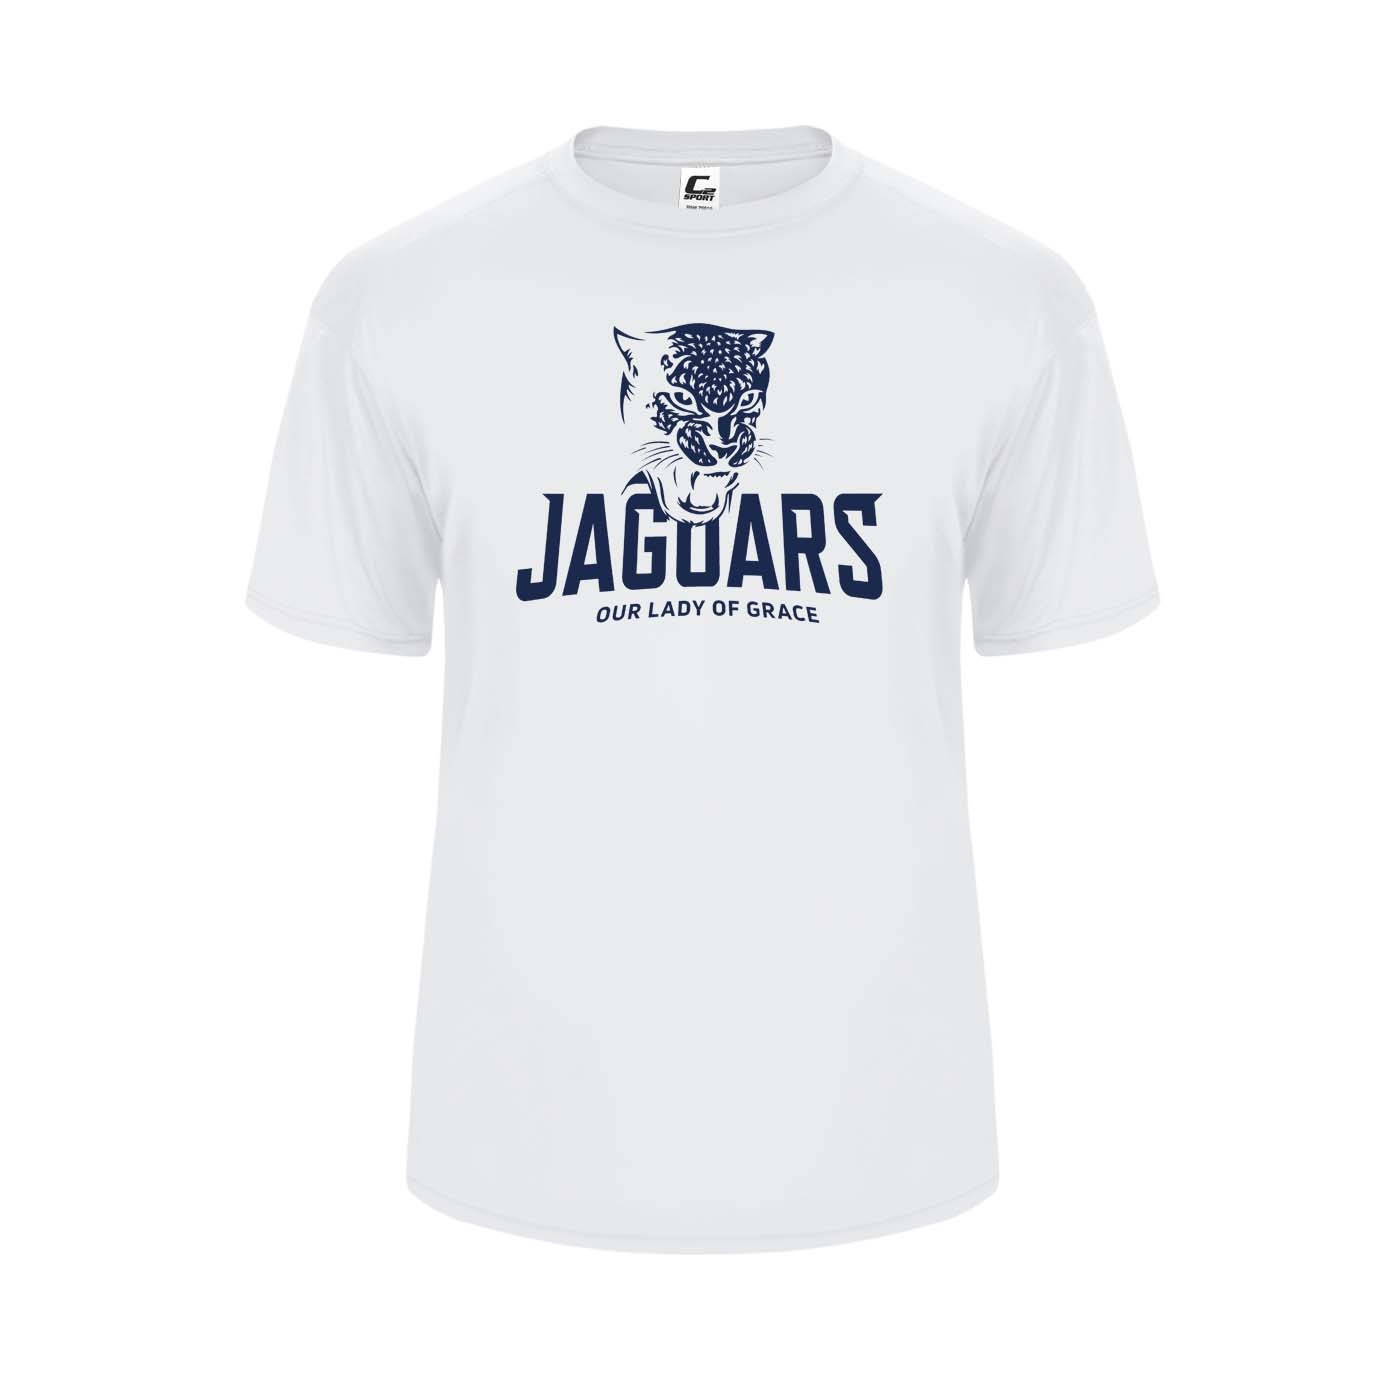 OLG Staff S/S Performance T-Shirt w/ Navy Logo #F5 - Please Allow 3-4 Weeks for Delivery